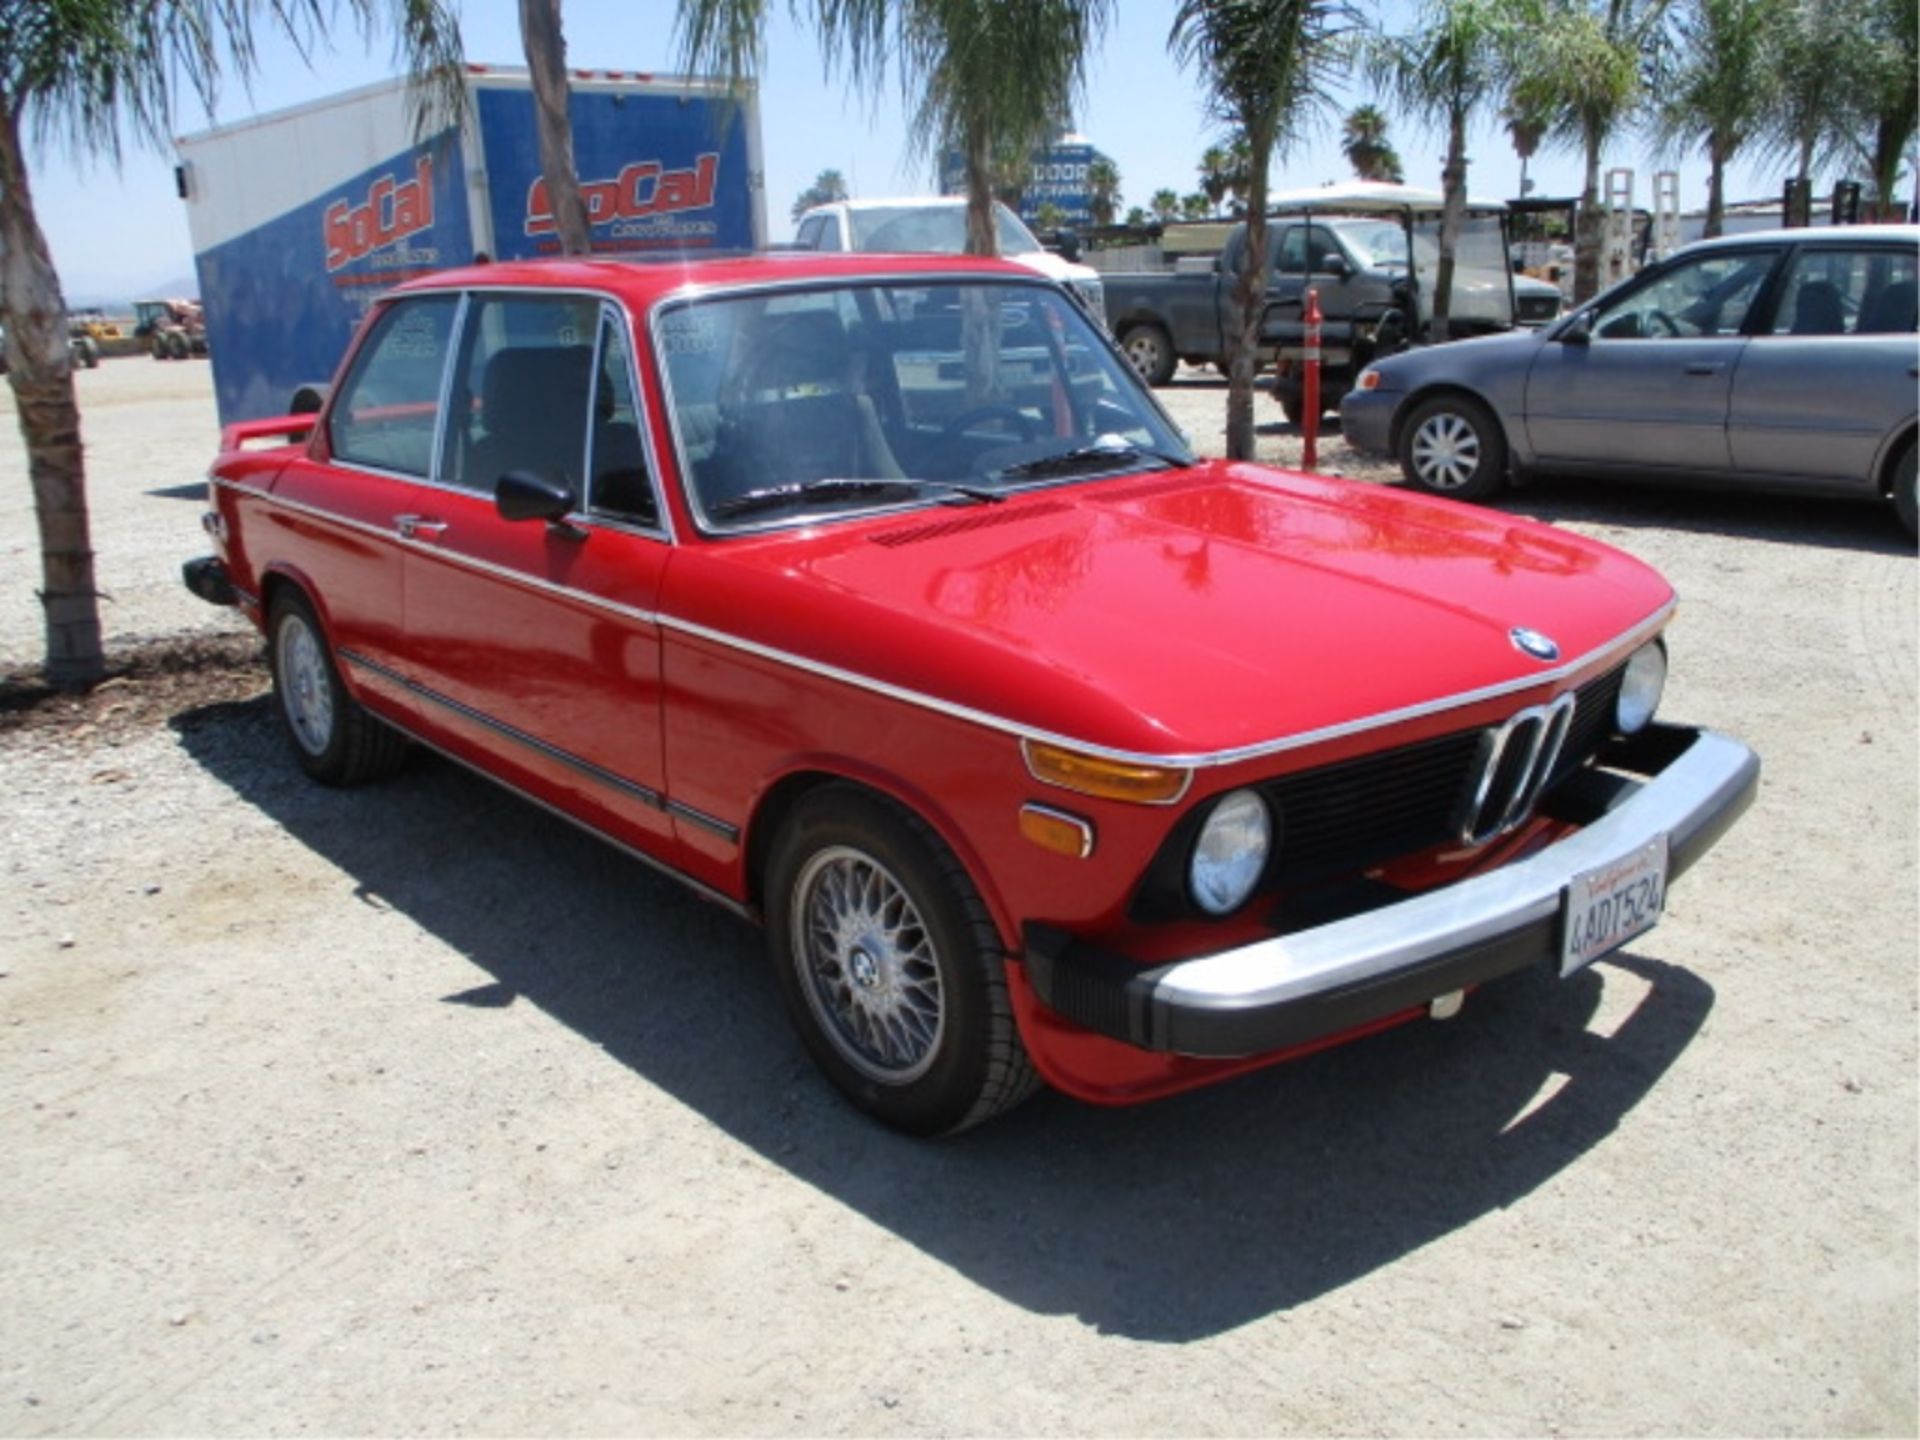 1972 BMW 2002ti Coupe, M10 4-Cyl Gas, 4-Speed Manual, S/N: 2761619, Mile/Hours - 49518 - Image 11 of 79